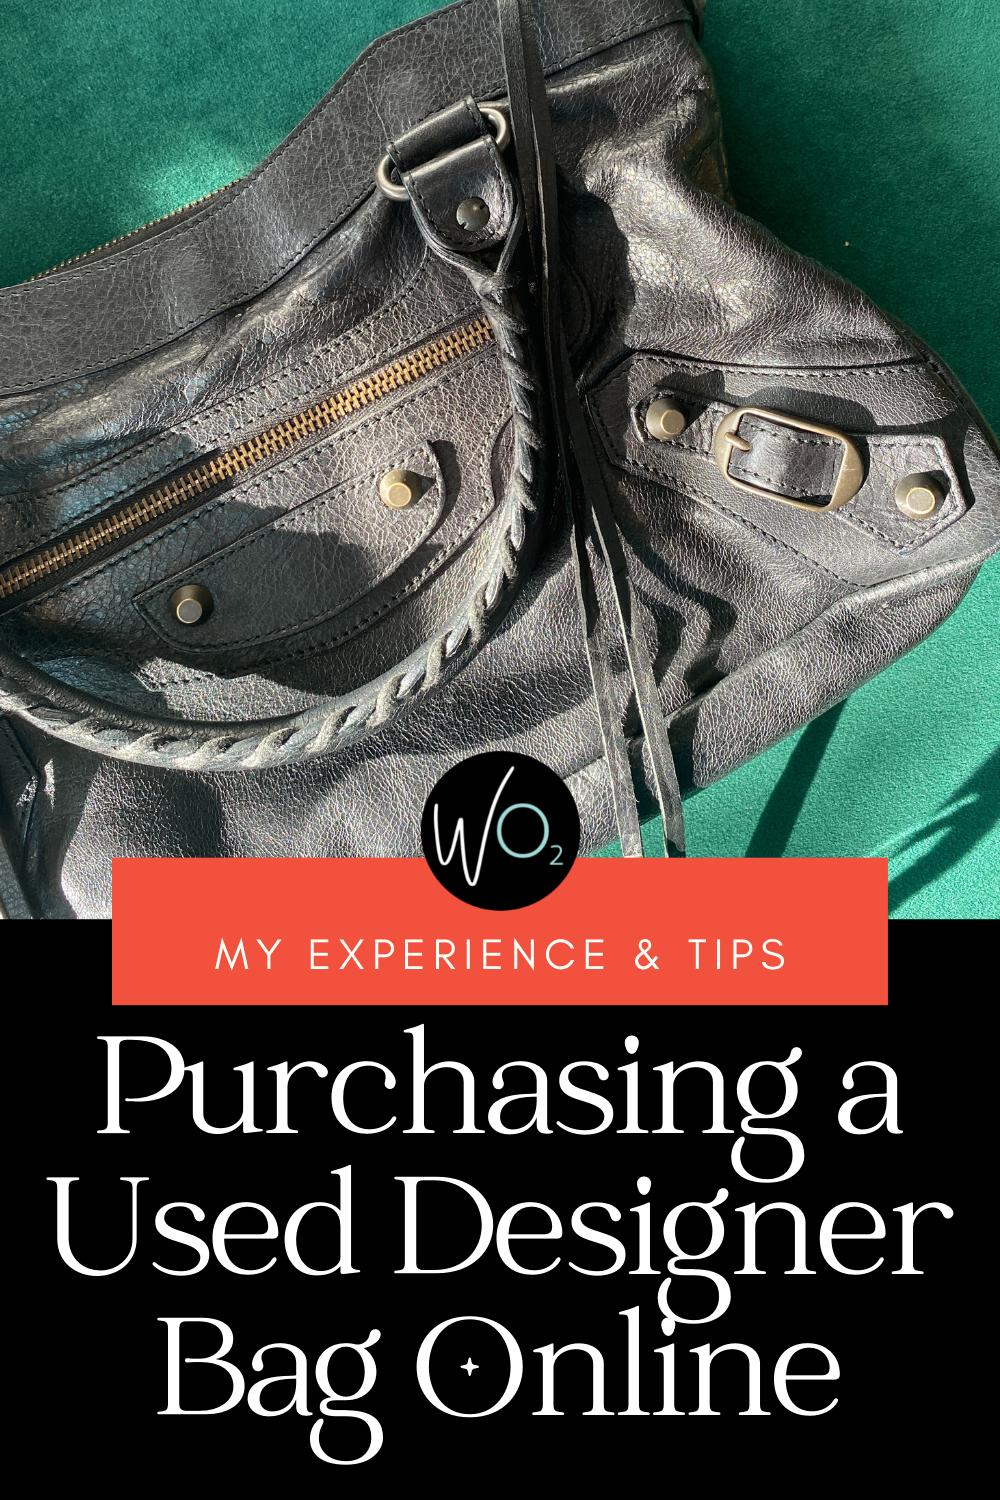 Purchasing a Used Designer Bag Online: My Experience